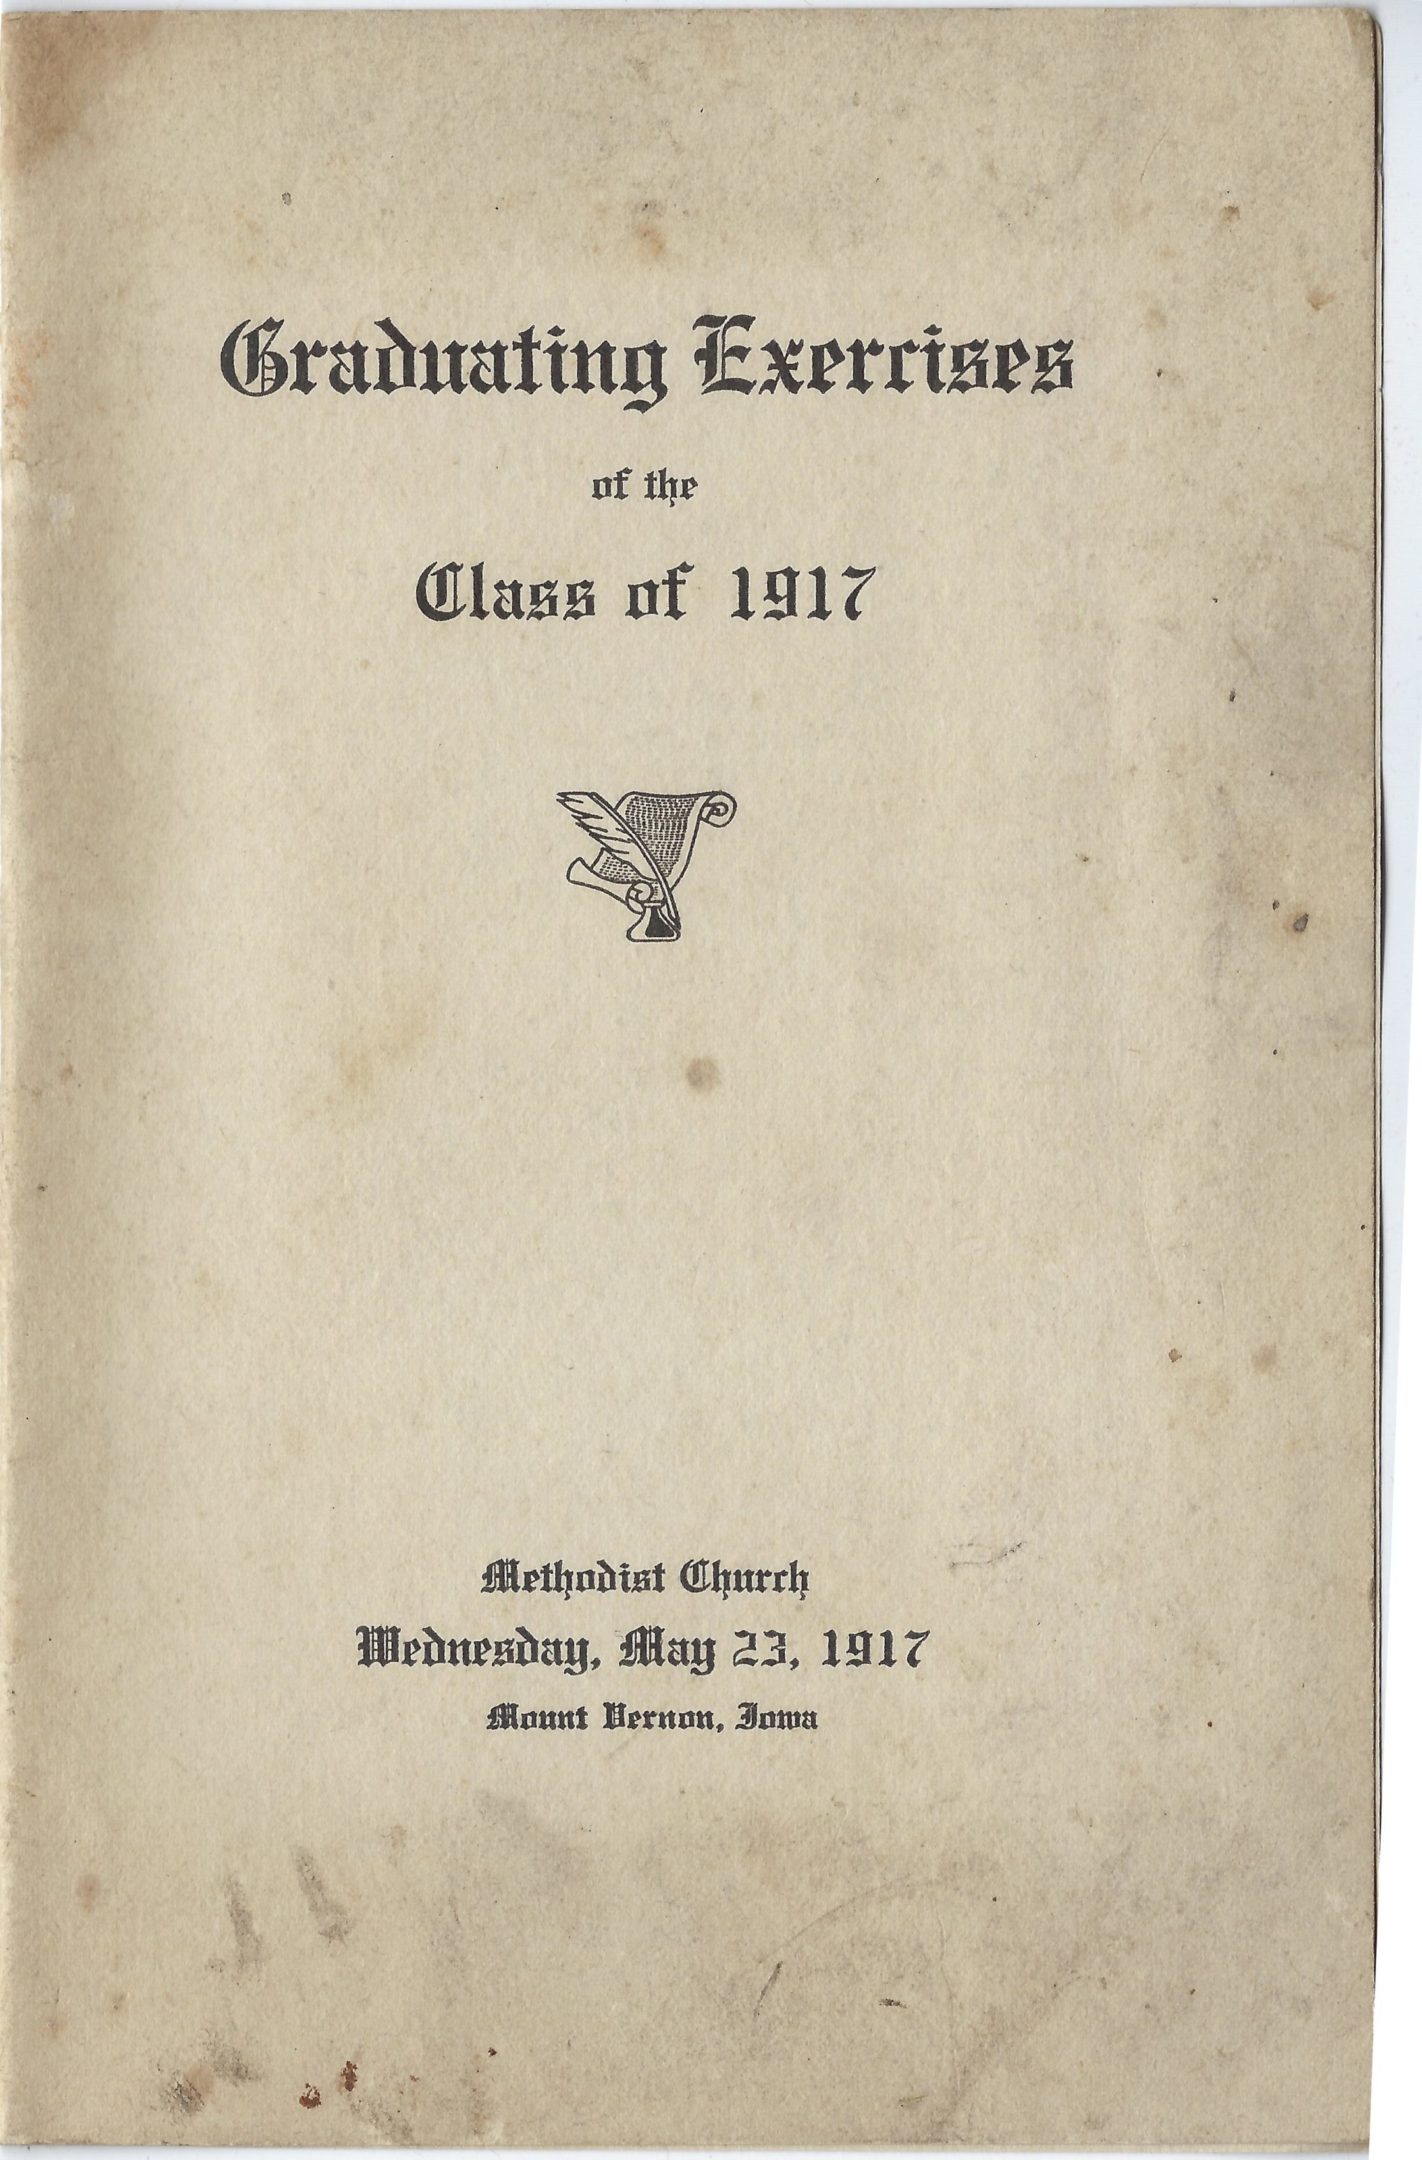 Photo of pamphlet for the graduating class of 1917.